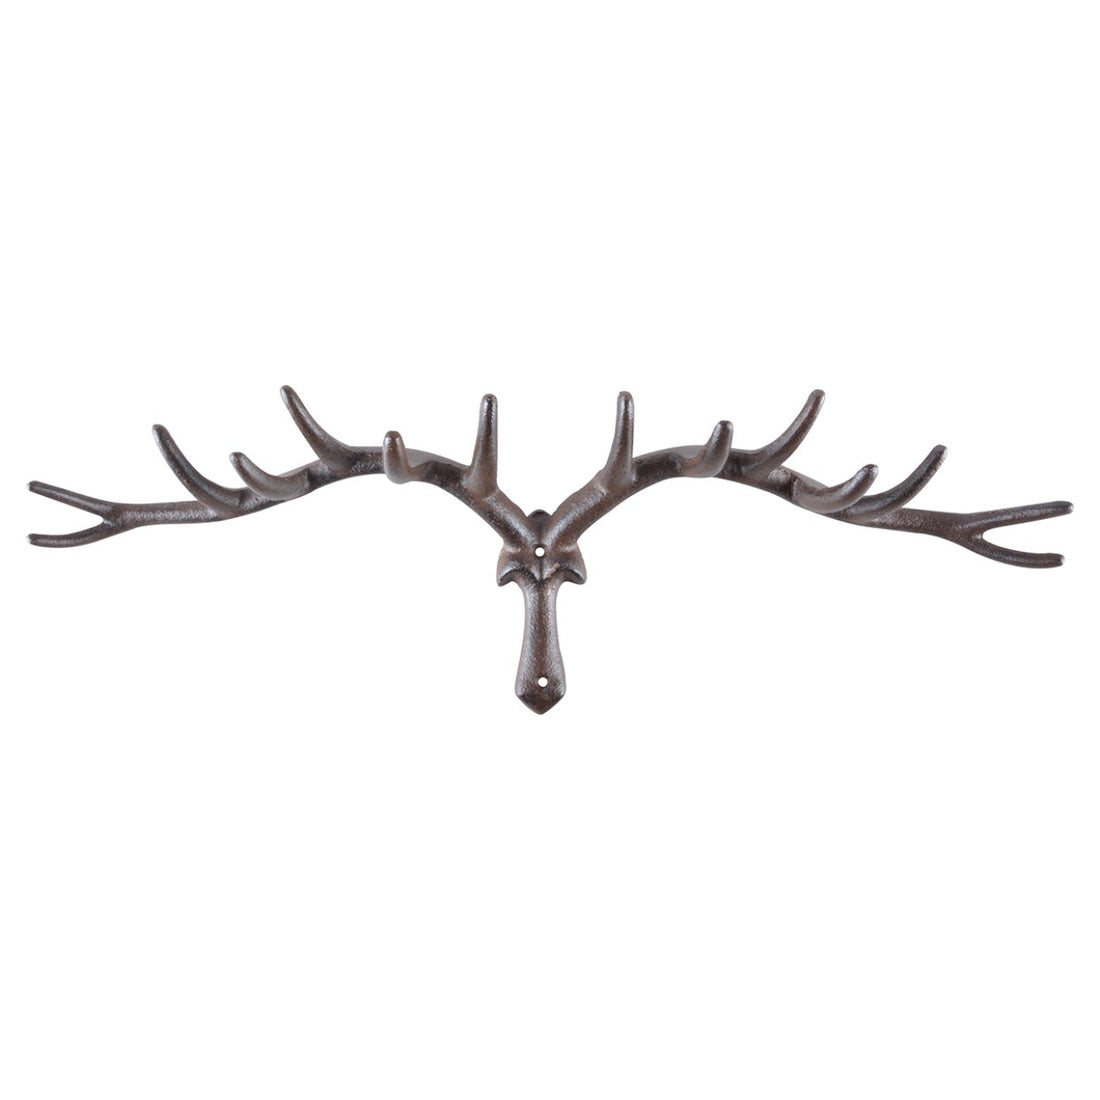 Cast Iron Antler Hook - The Flower Crate